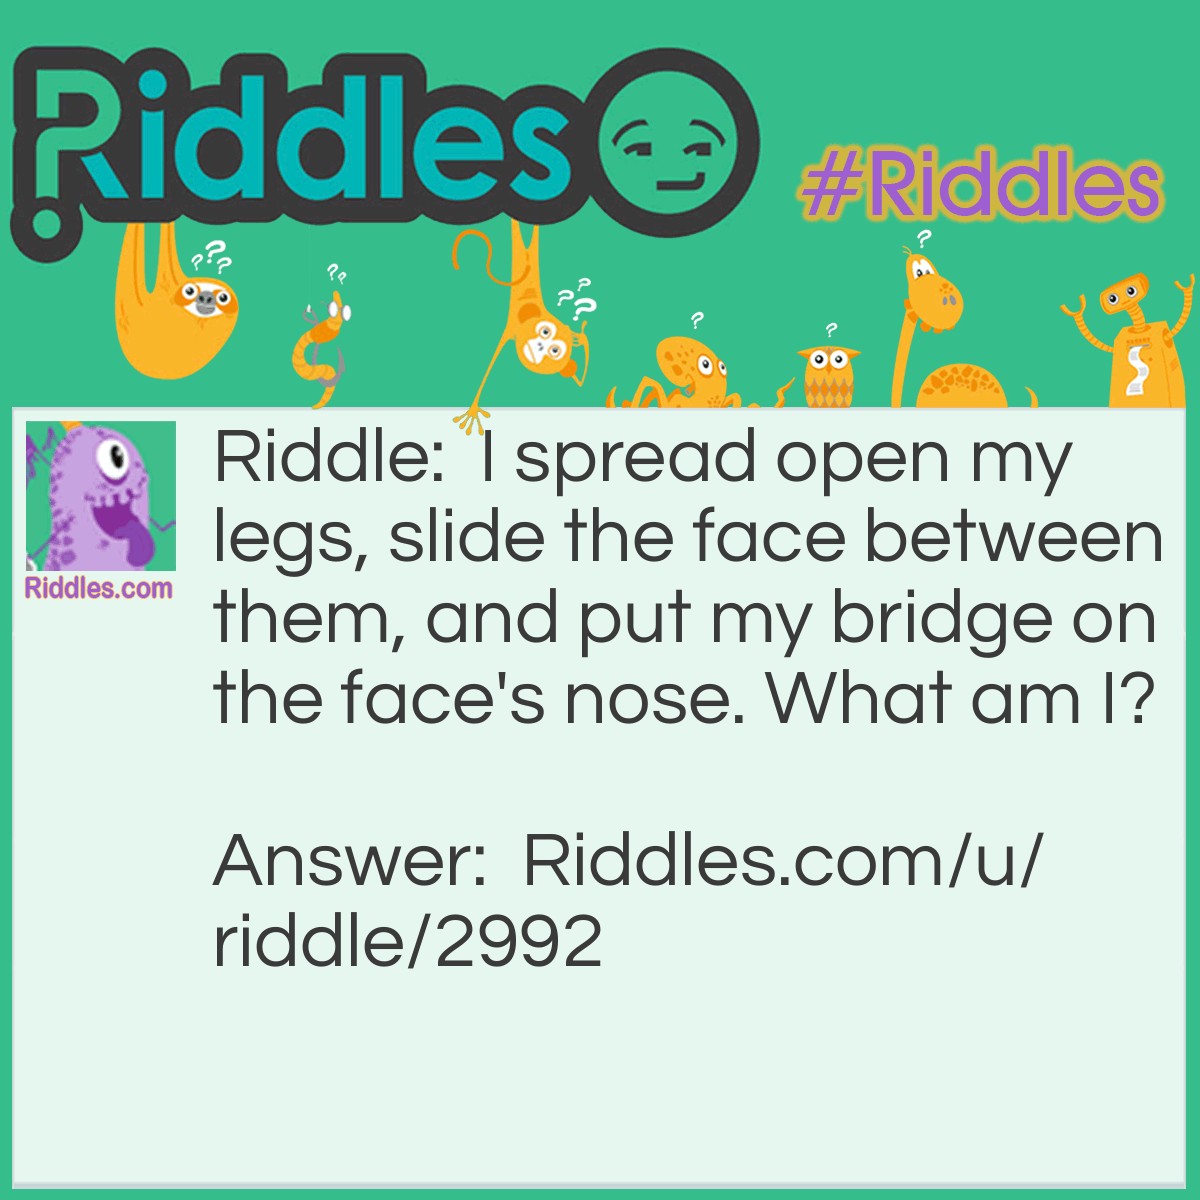 Riddle: I spread open my legs, slide the face between them, and put my bridge on the face's nose. What am I? Answer: A spectacle.